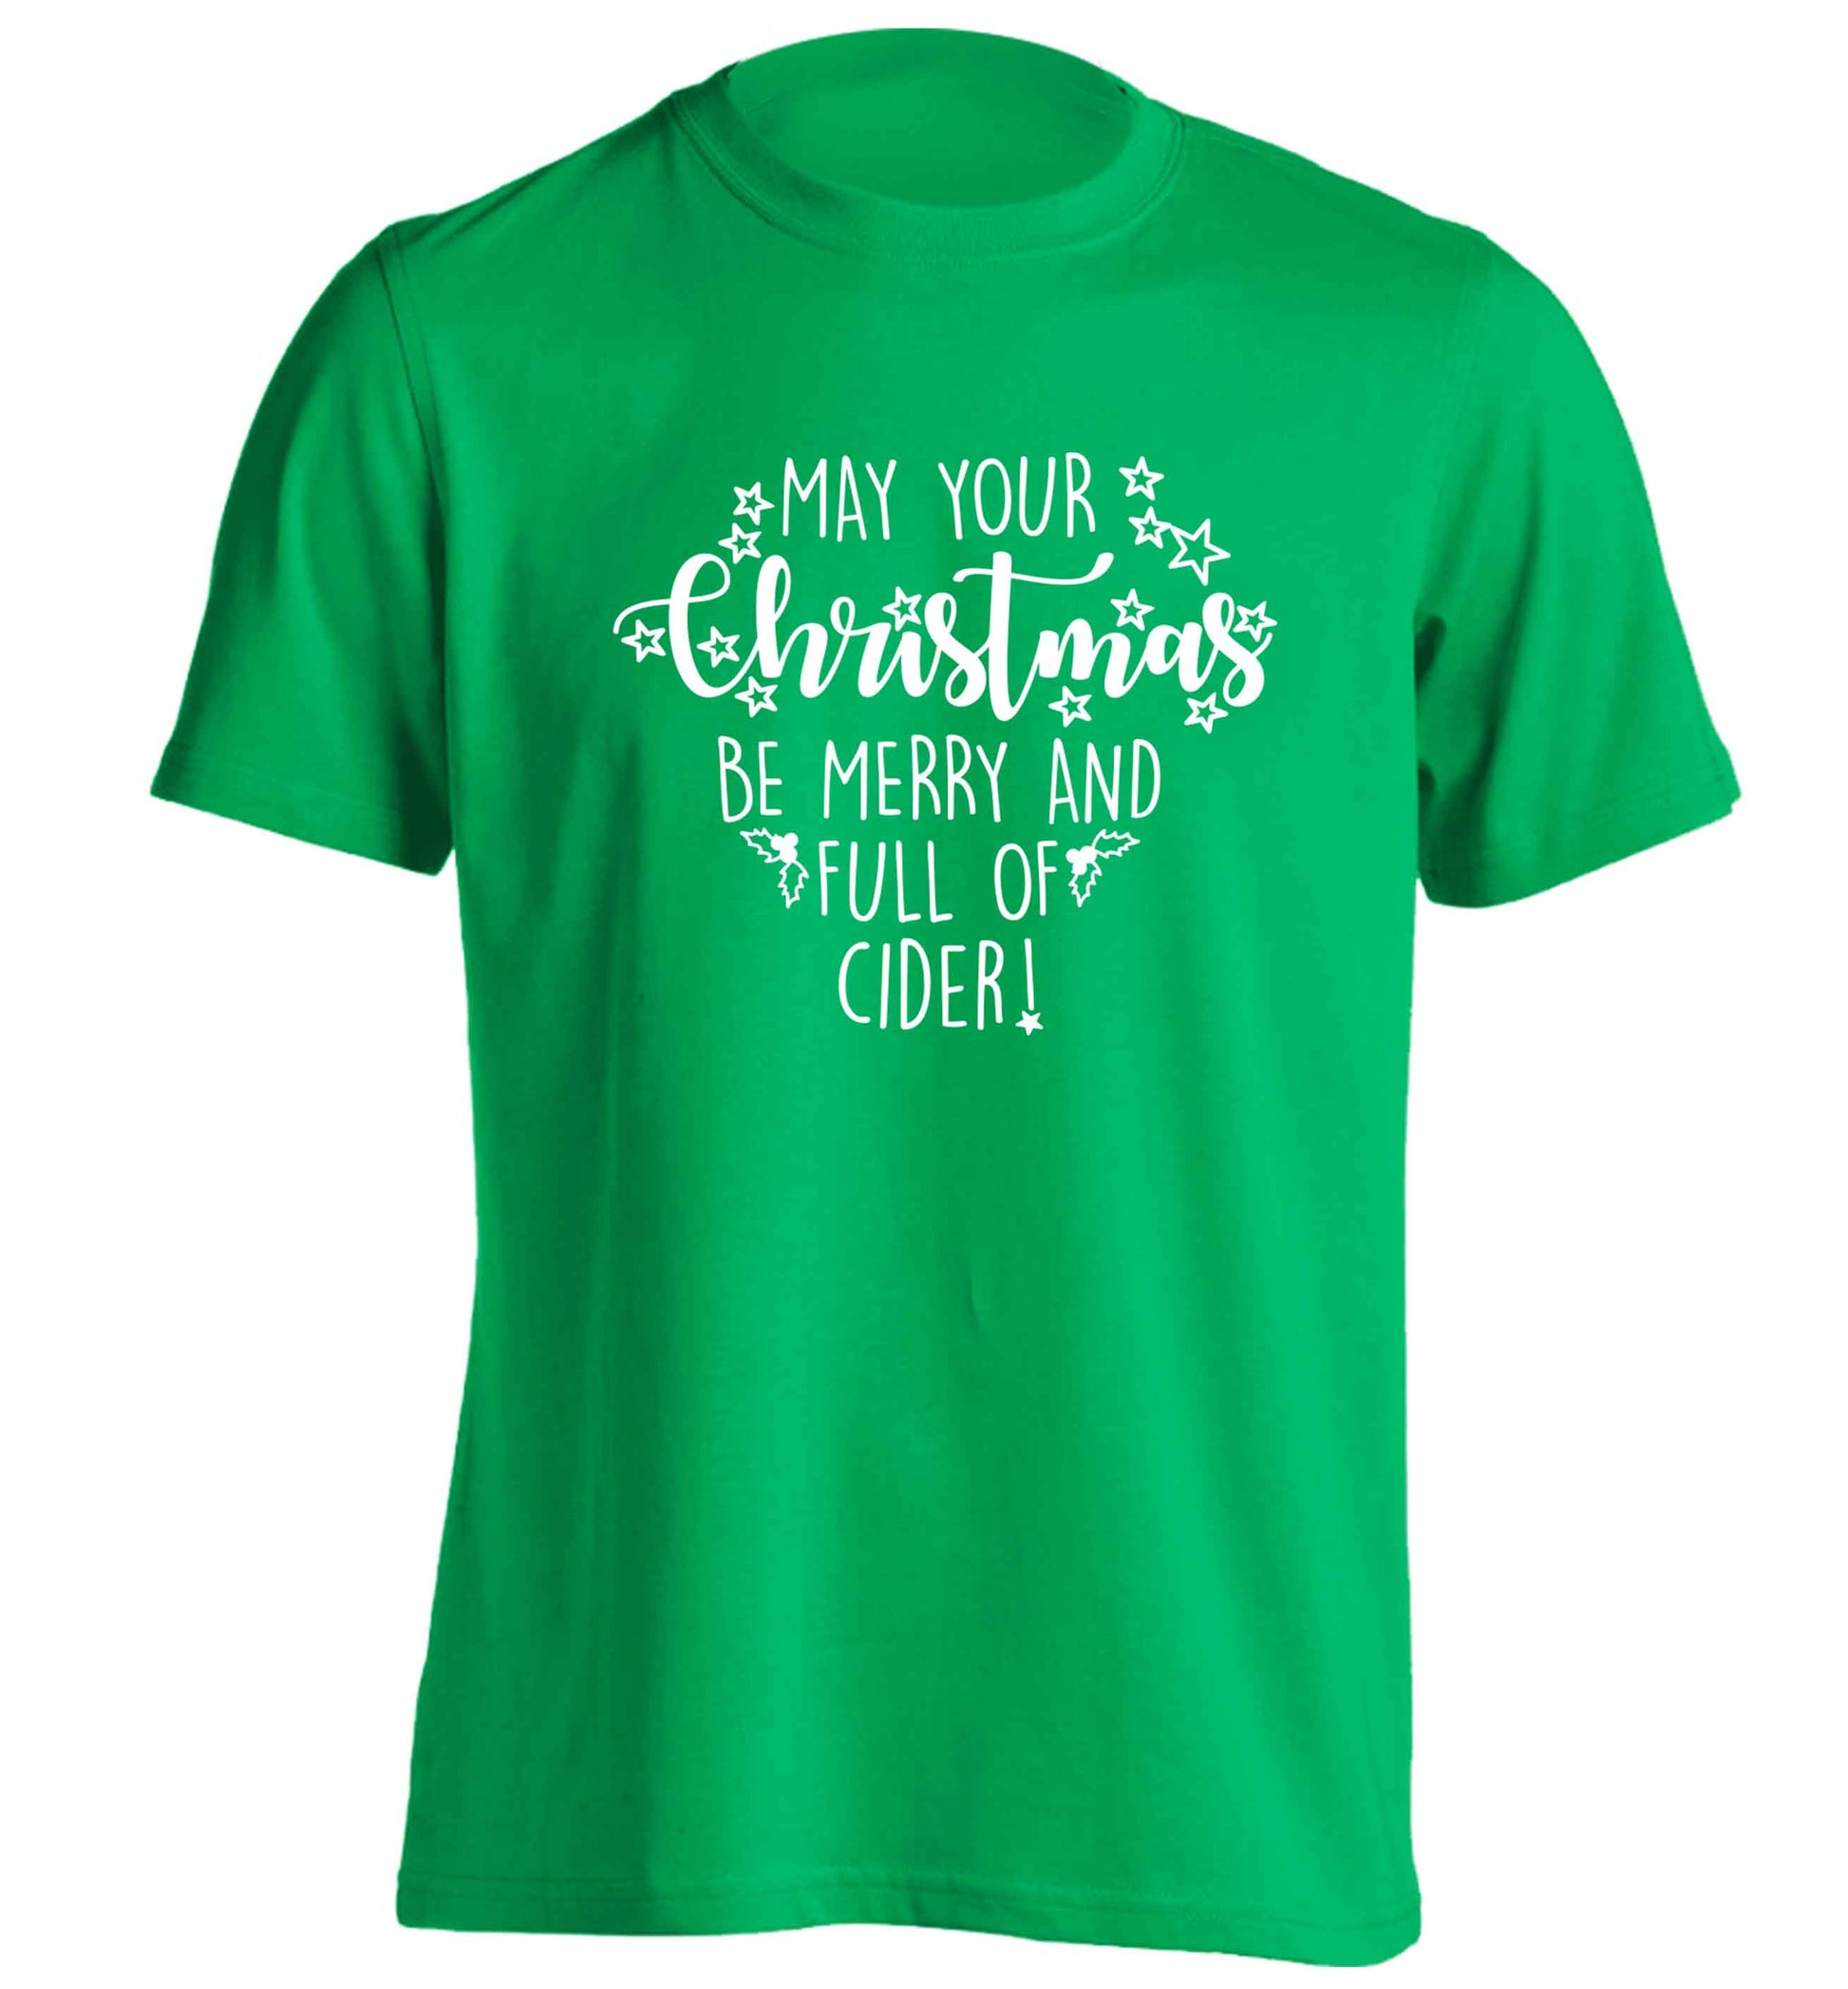 May your Christmas be merry and full of cider adults unisex green Tshirt 2XL